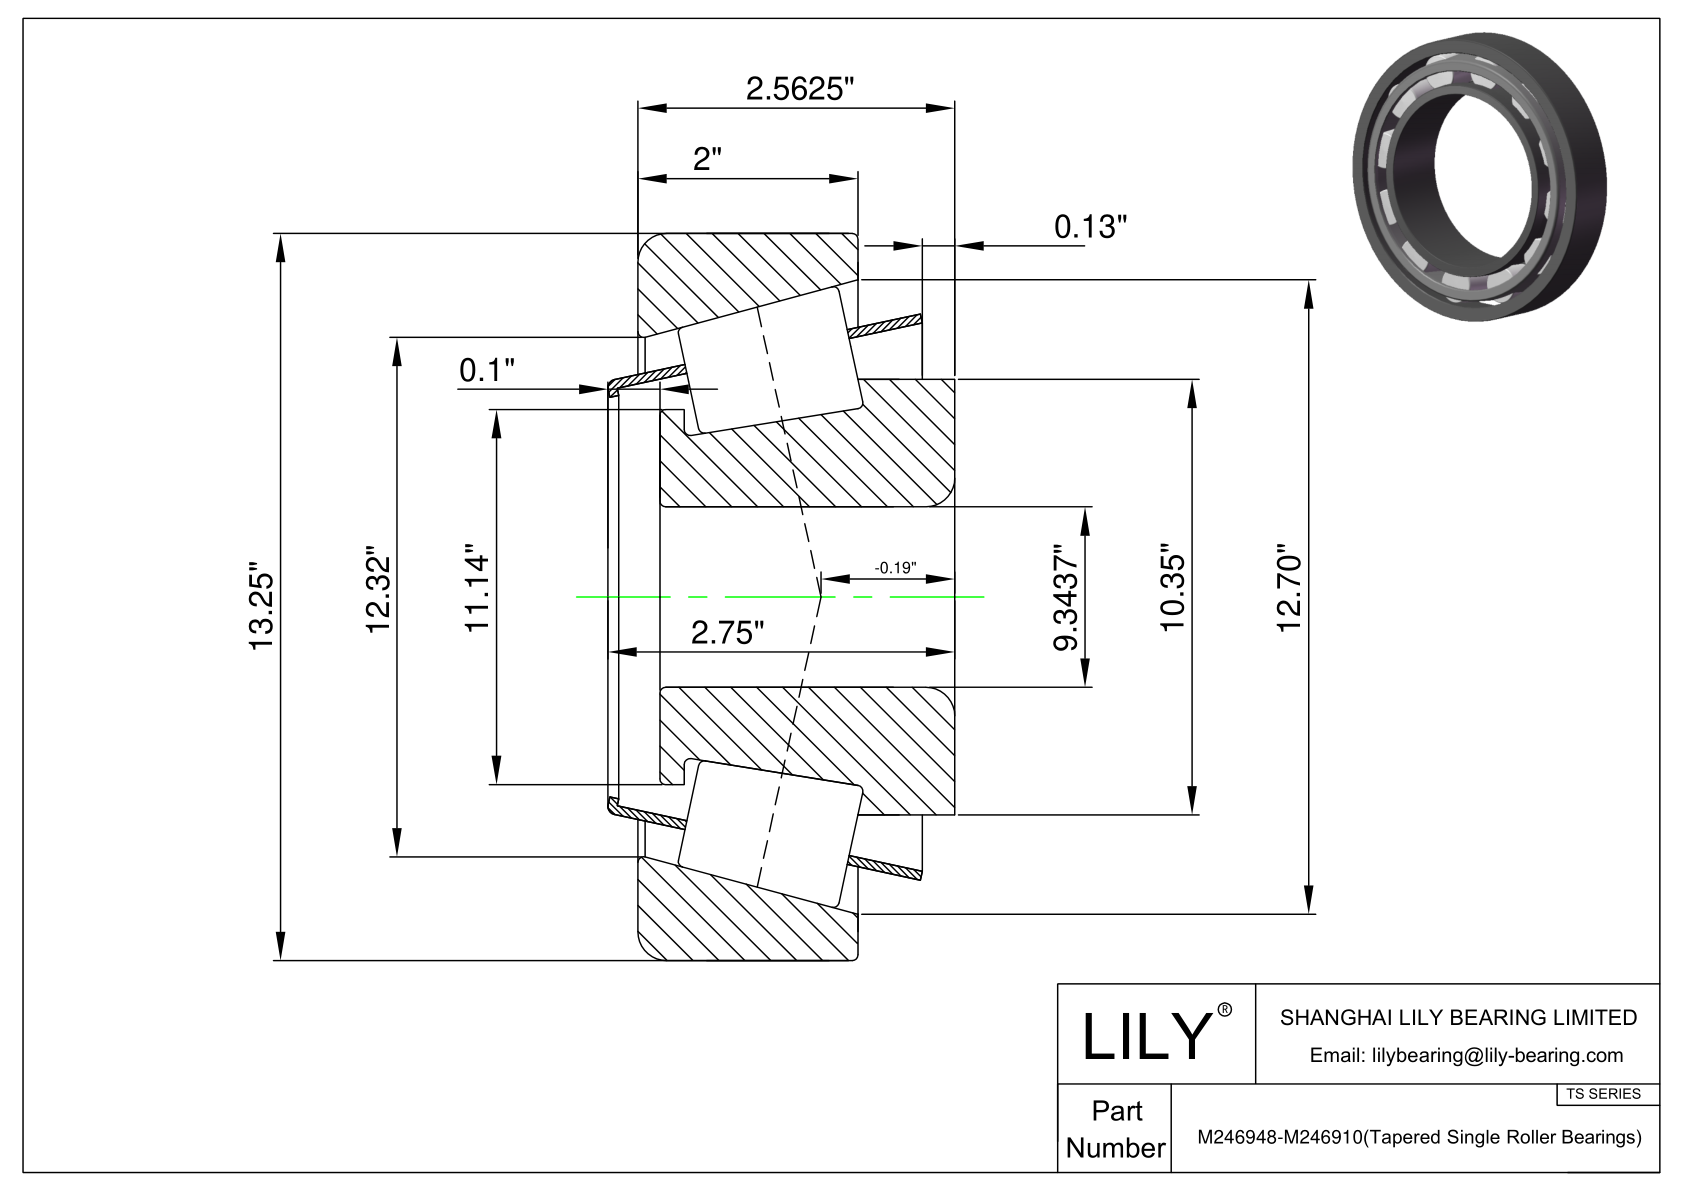 M246948-M246910 TS (Tapered Single Roller Bearings) (Imperial) cad drawing